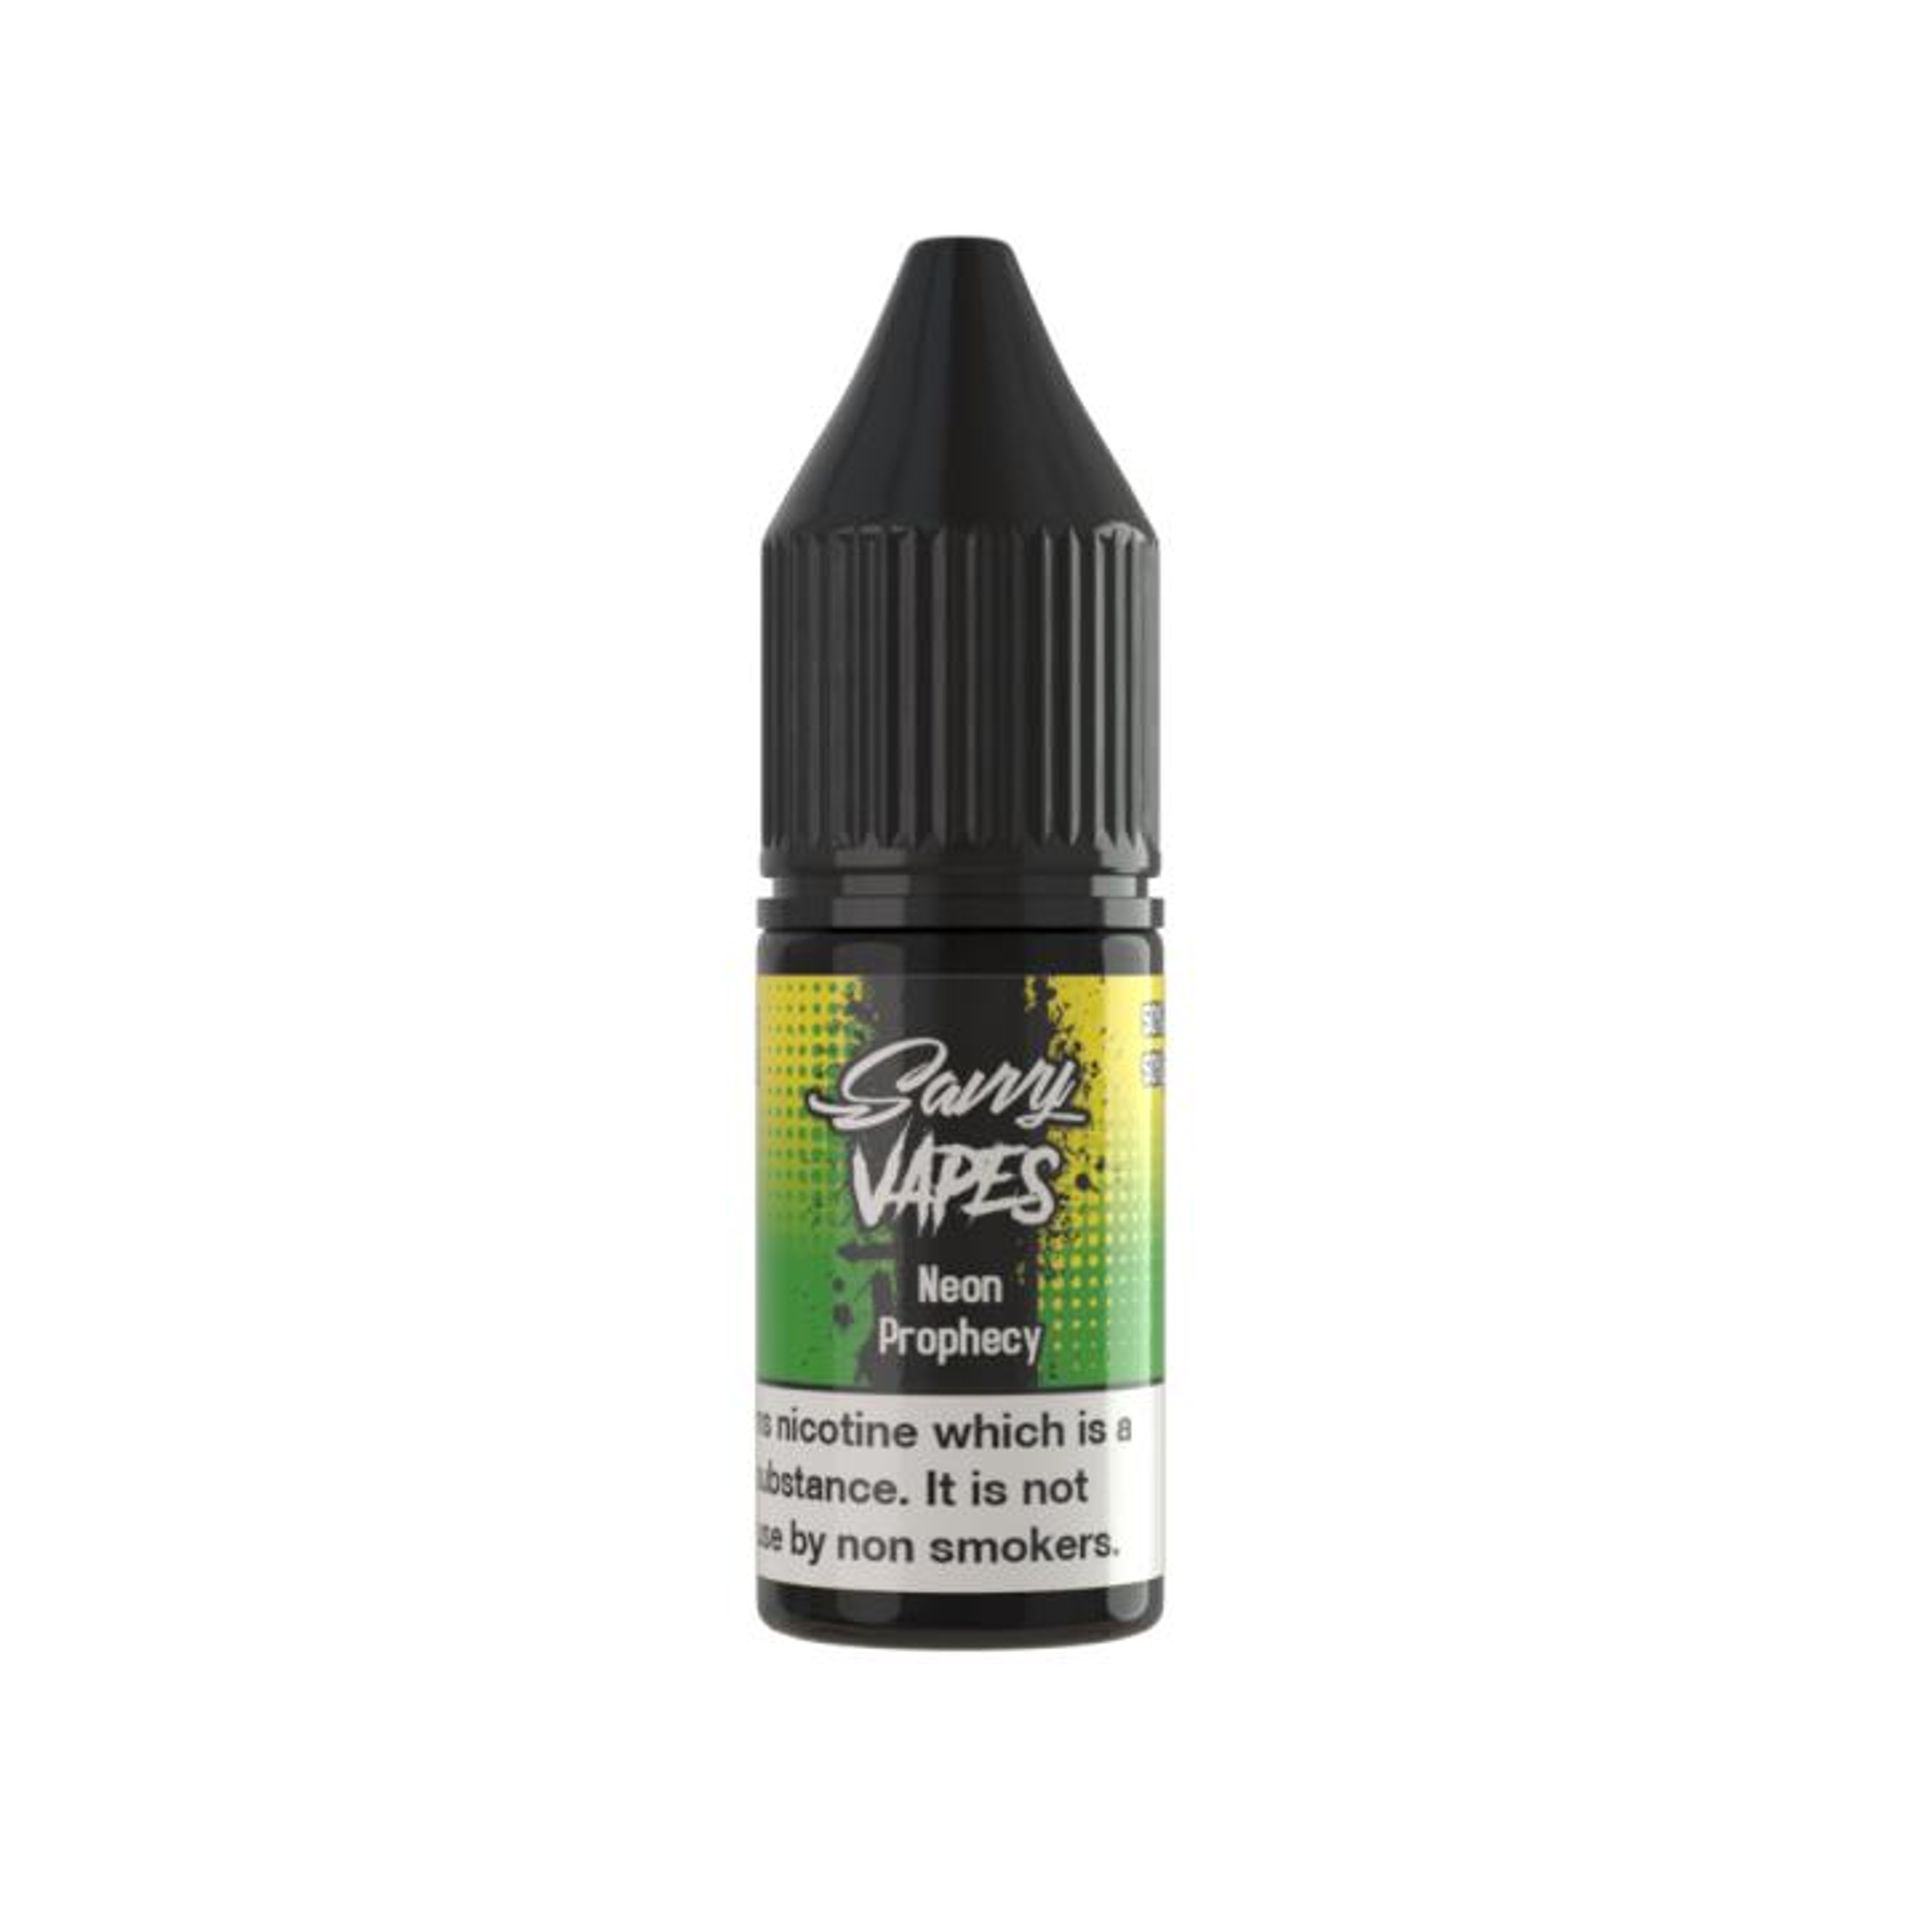 Image of Neon Prophecy by Savvy Vapes